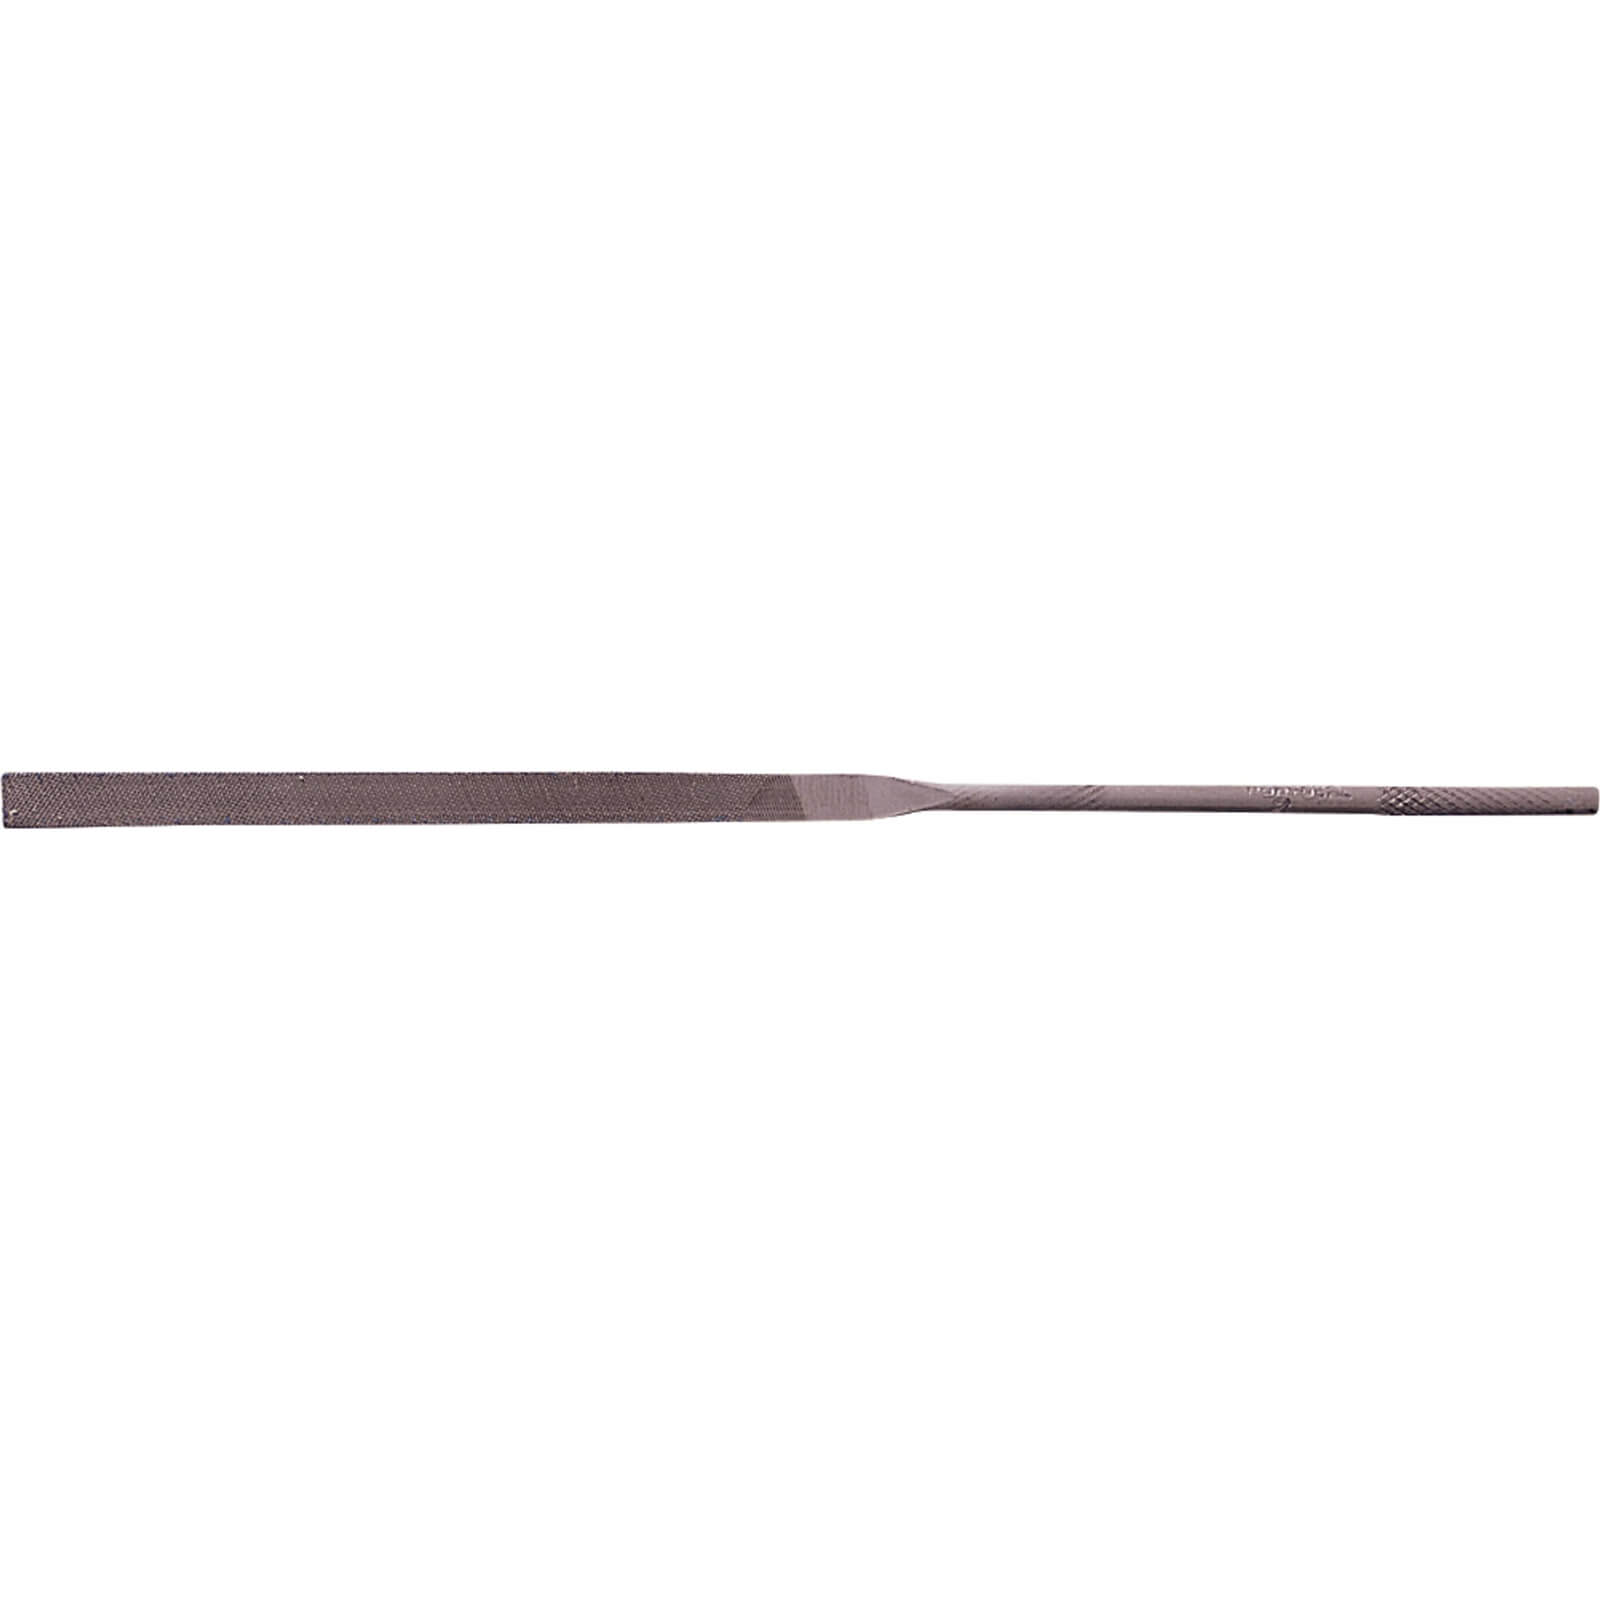 Photos - File / Rasp Draper Flat Parallel Needle File 160mm No 2 Pack of 12 NF 